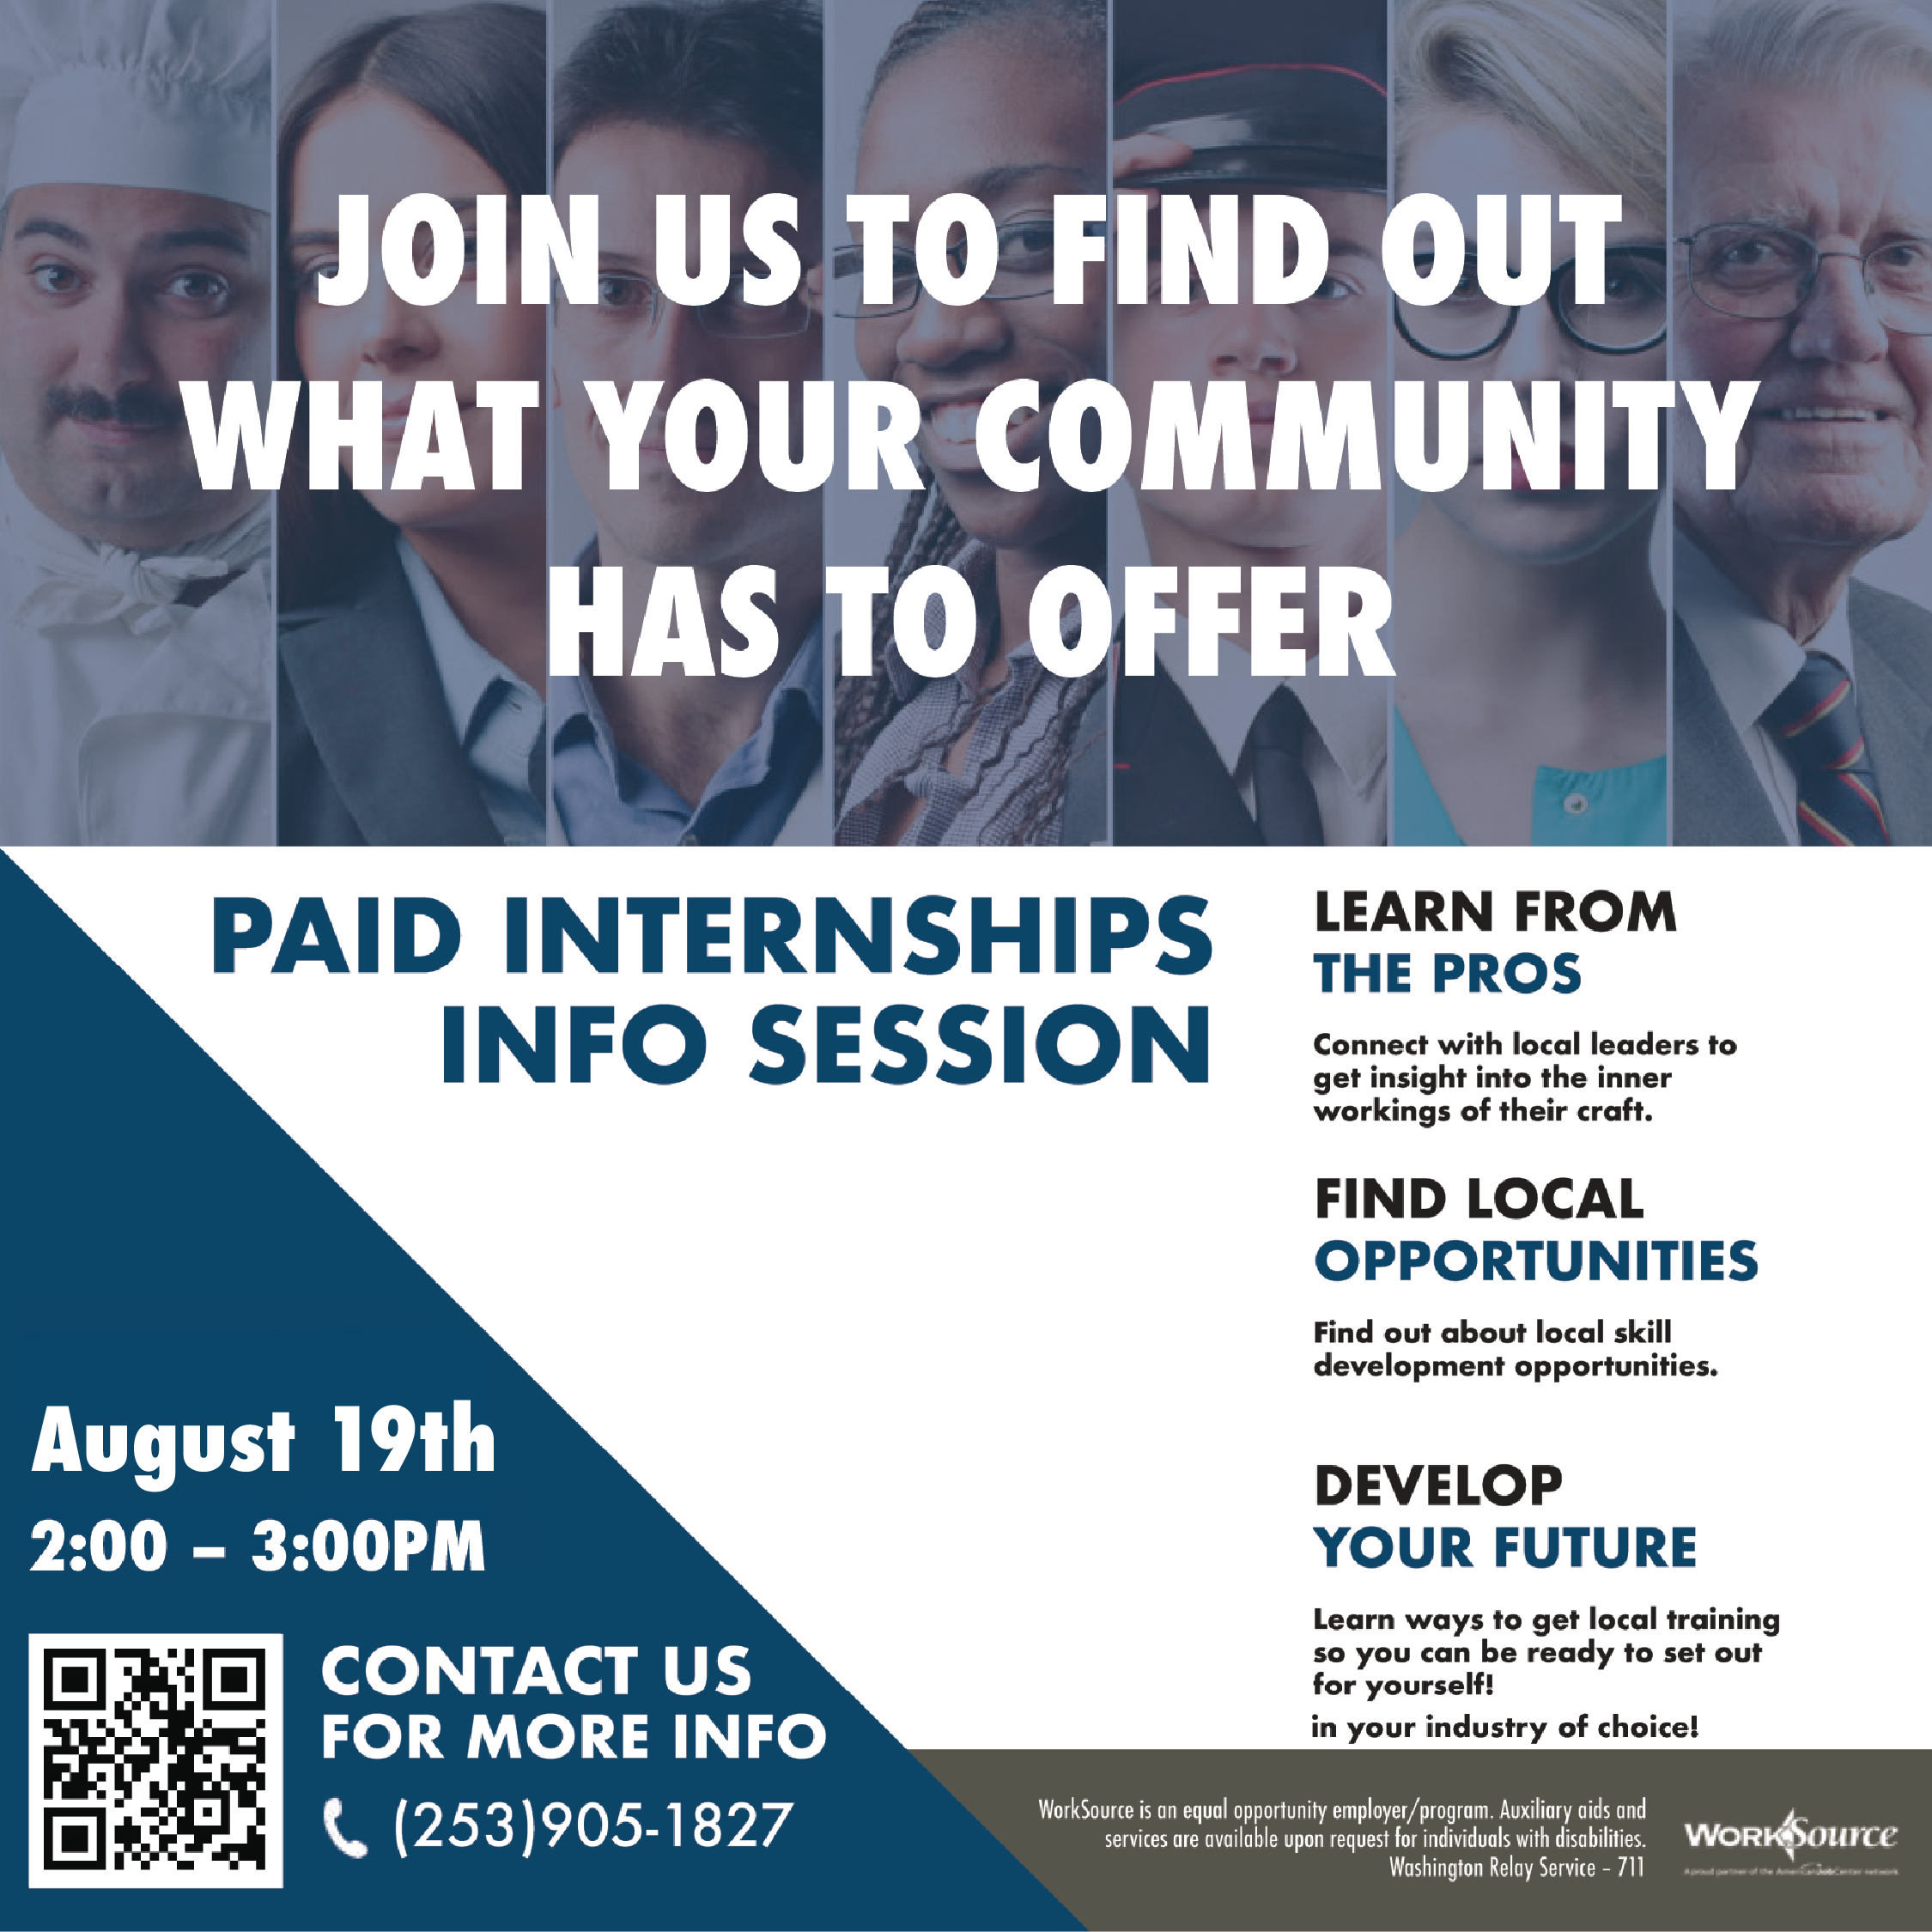 Paid Internships Information Session - August 19th 2